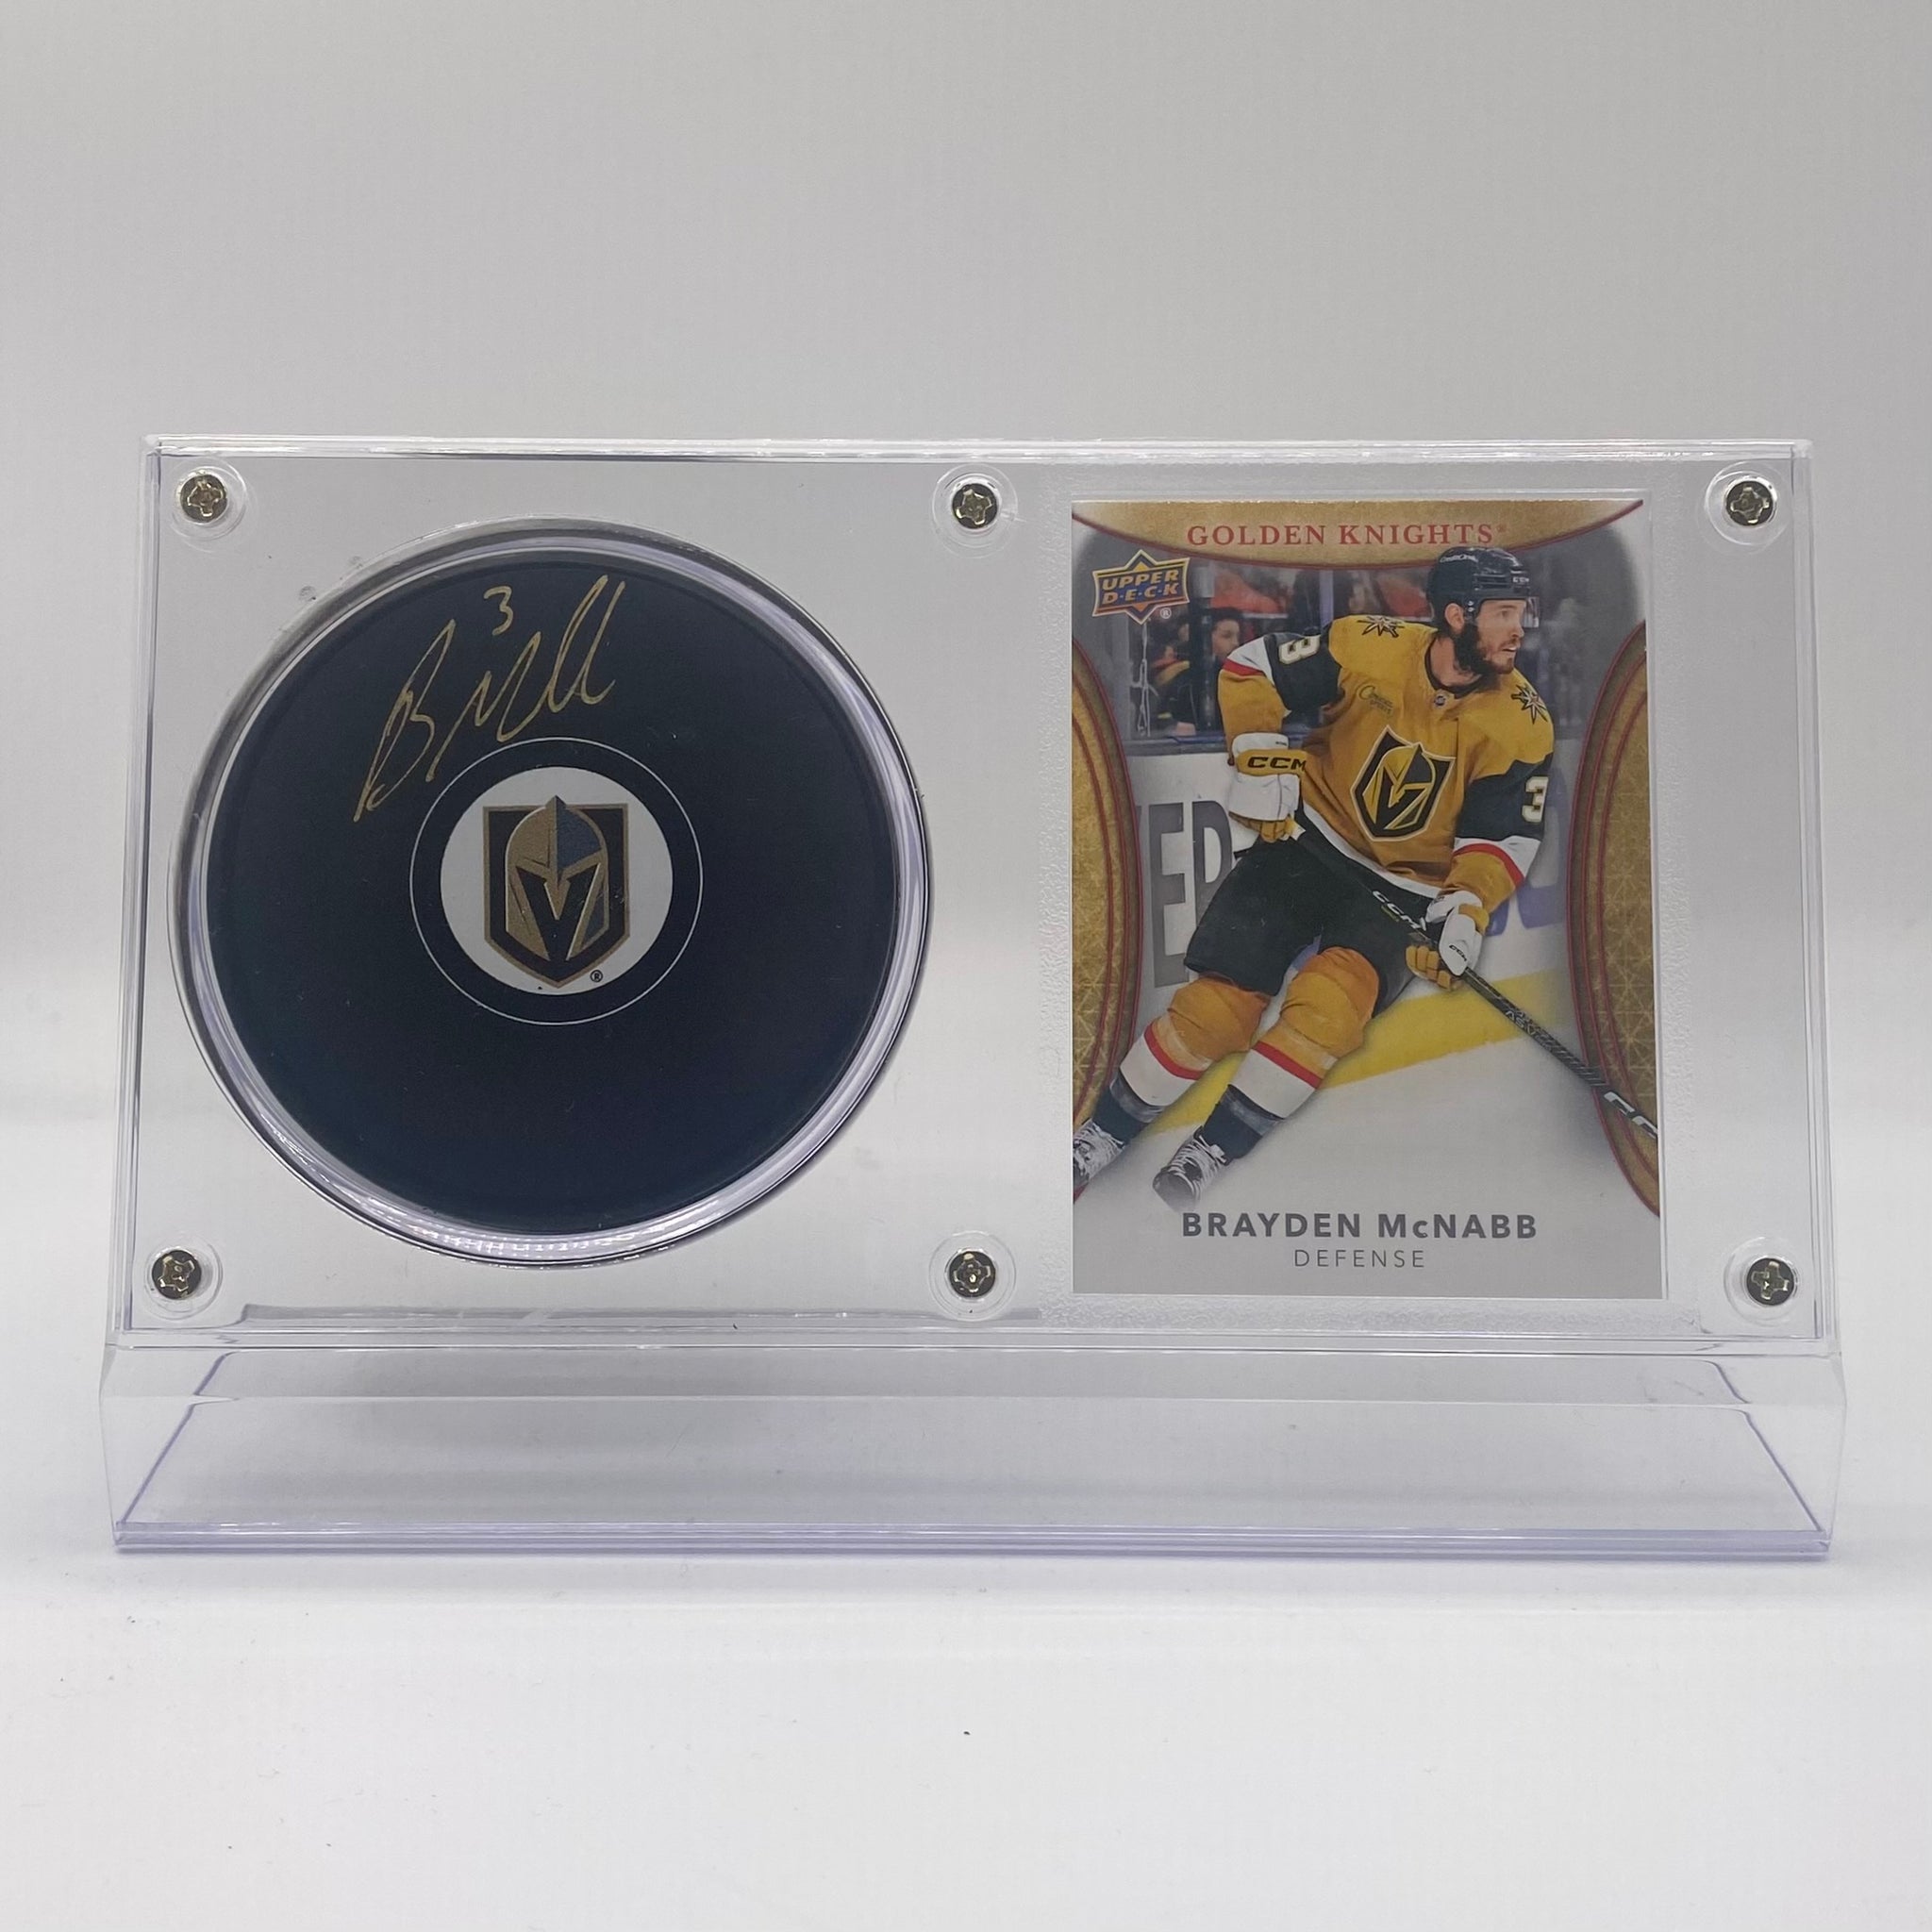 Brayden McNabb Vegas Golden Knights Autographed Hockey Puck and Trading Card Case